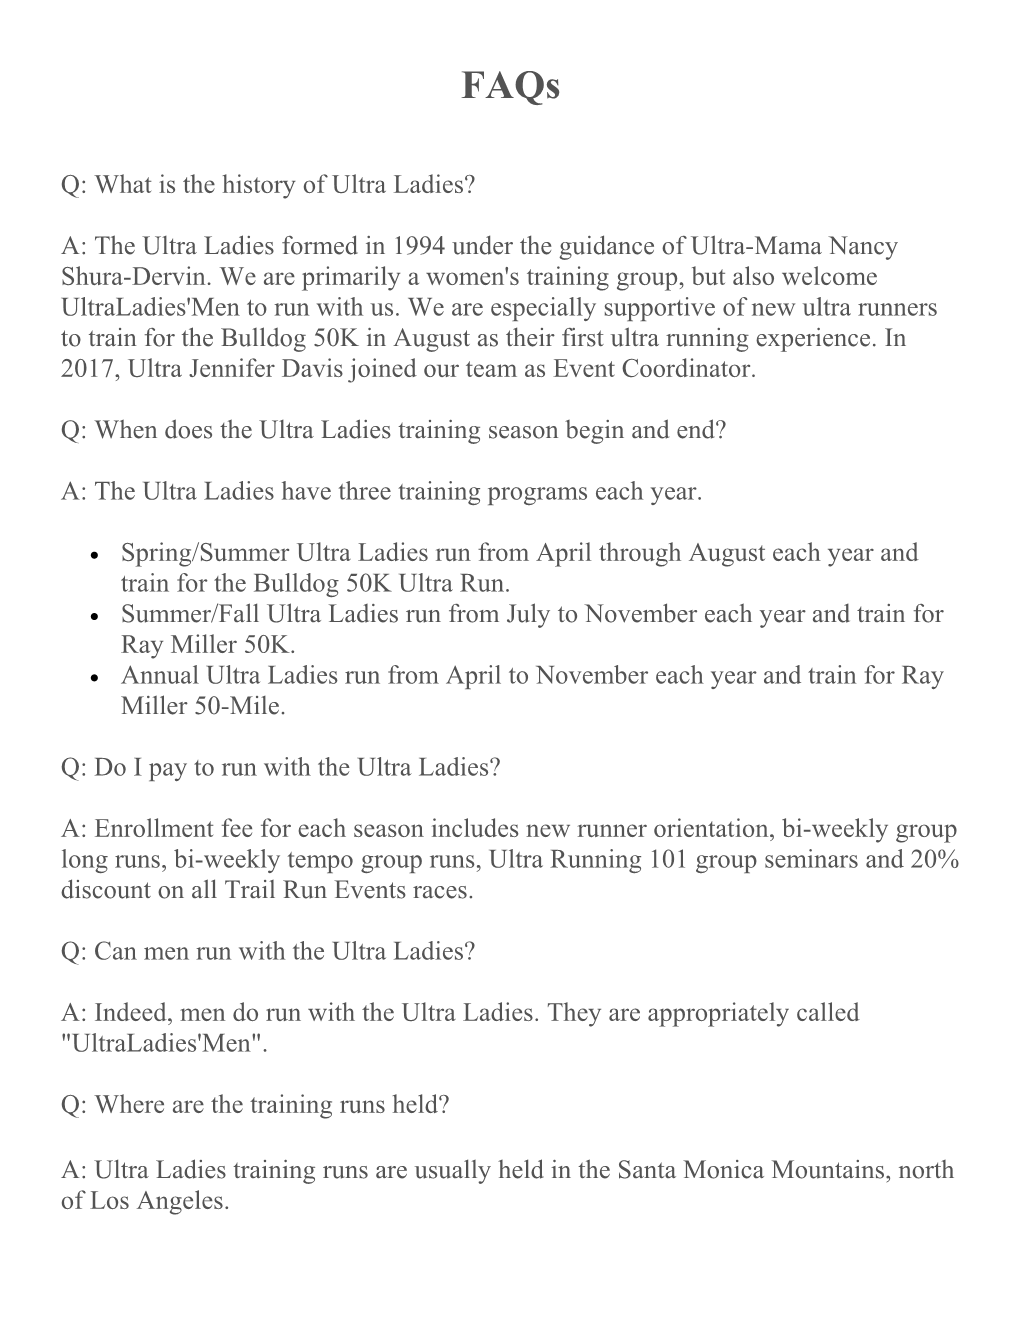 Q: What Is the History of Ultra Ladies?